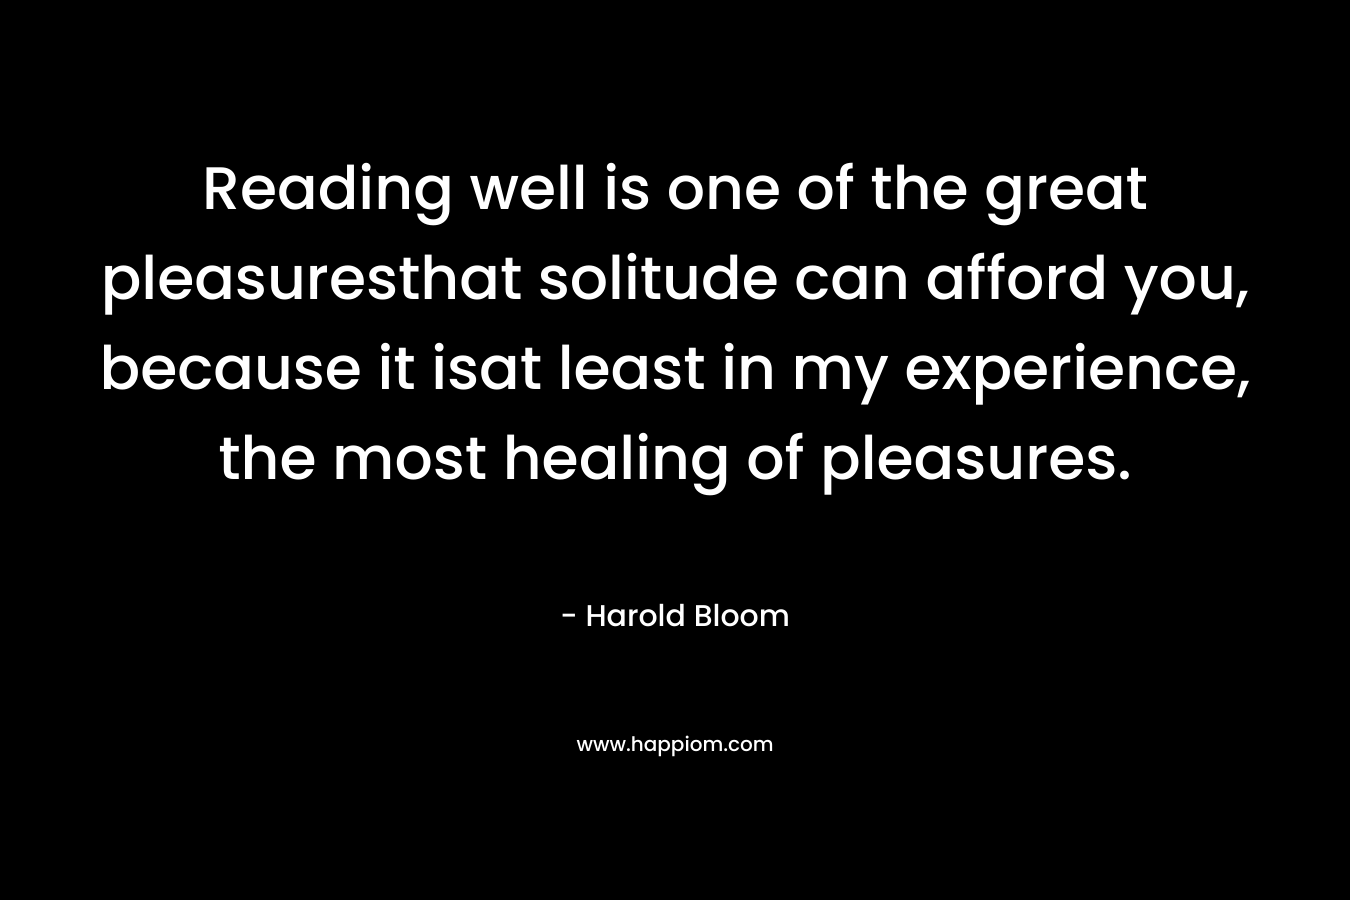 Reading well is one of the great pleasuresthat solitude can afford you, because it isat least in my experience, the most healing of pleasures.